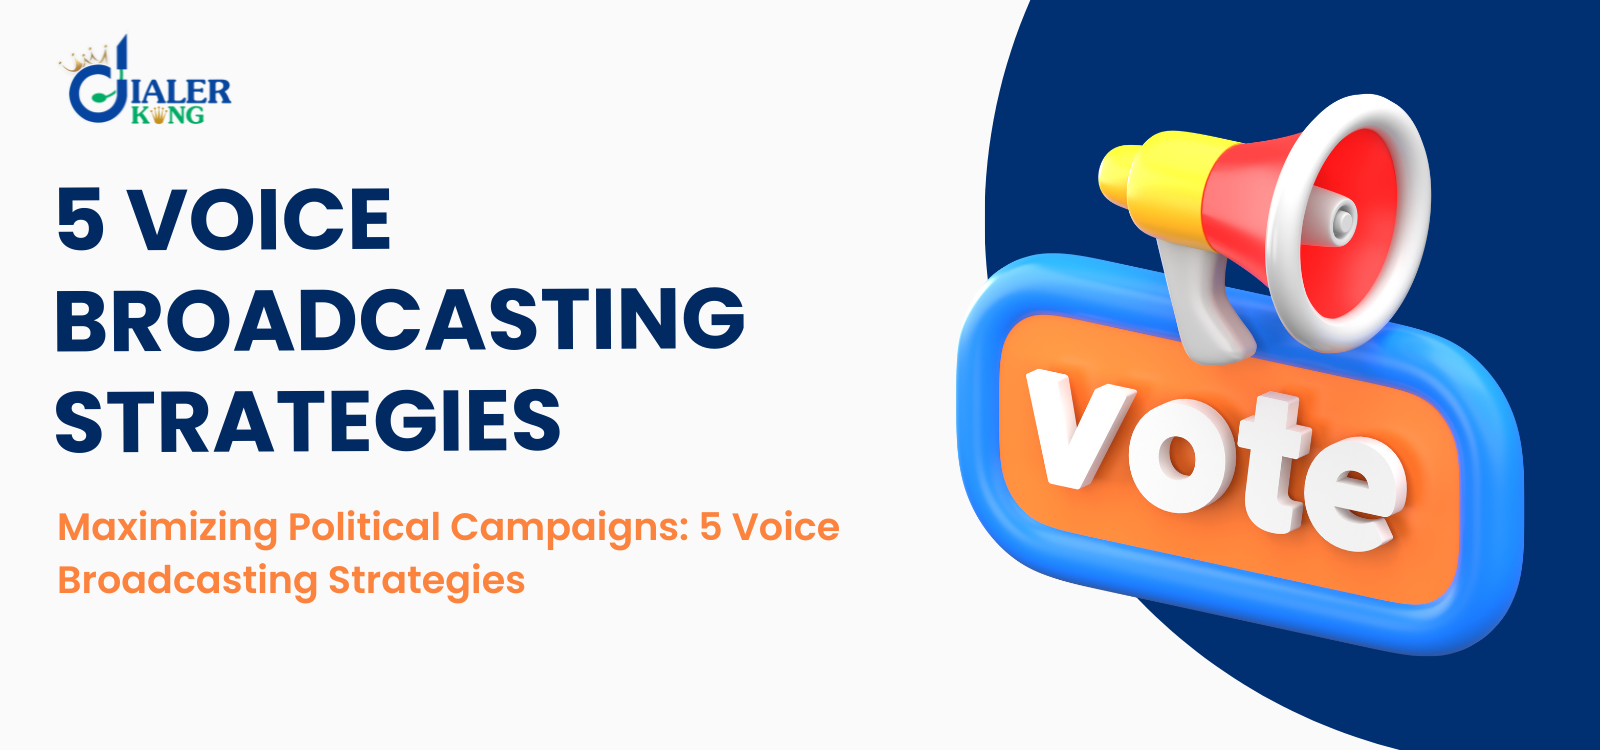 Maximizing Political Campaigns 5 Voice Broadcasting Strategies.